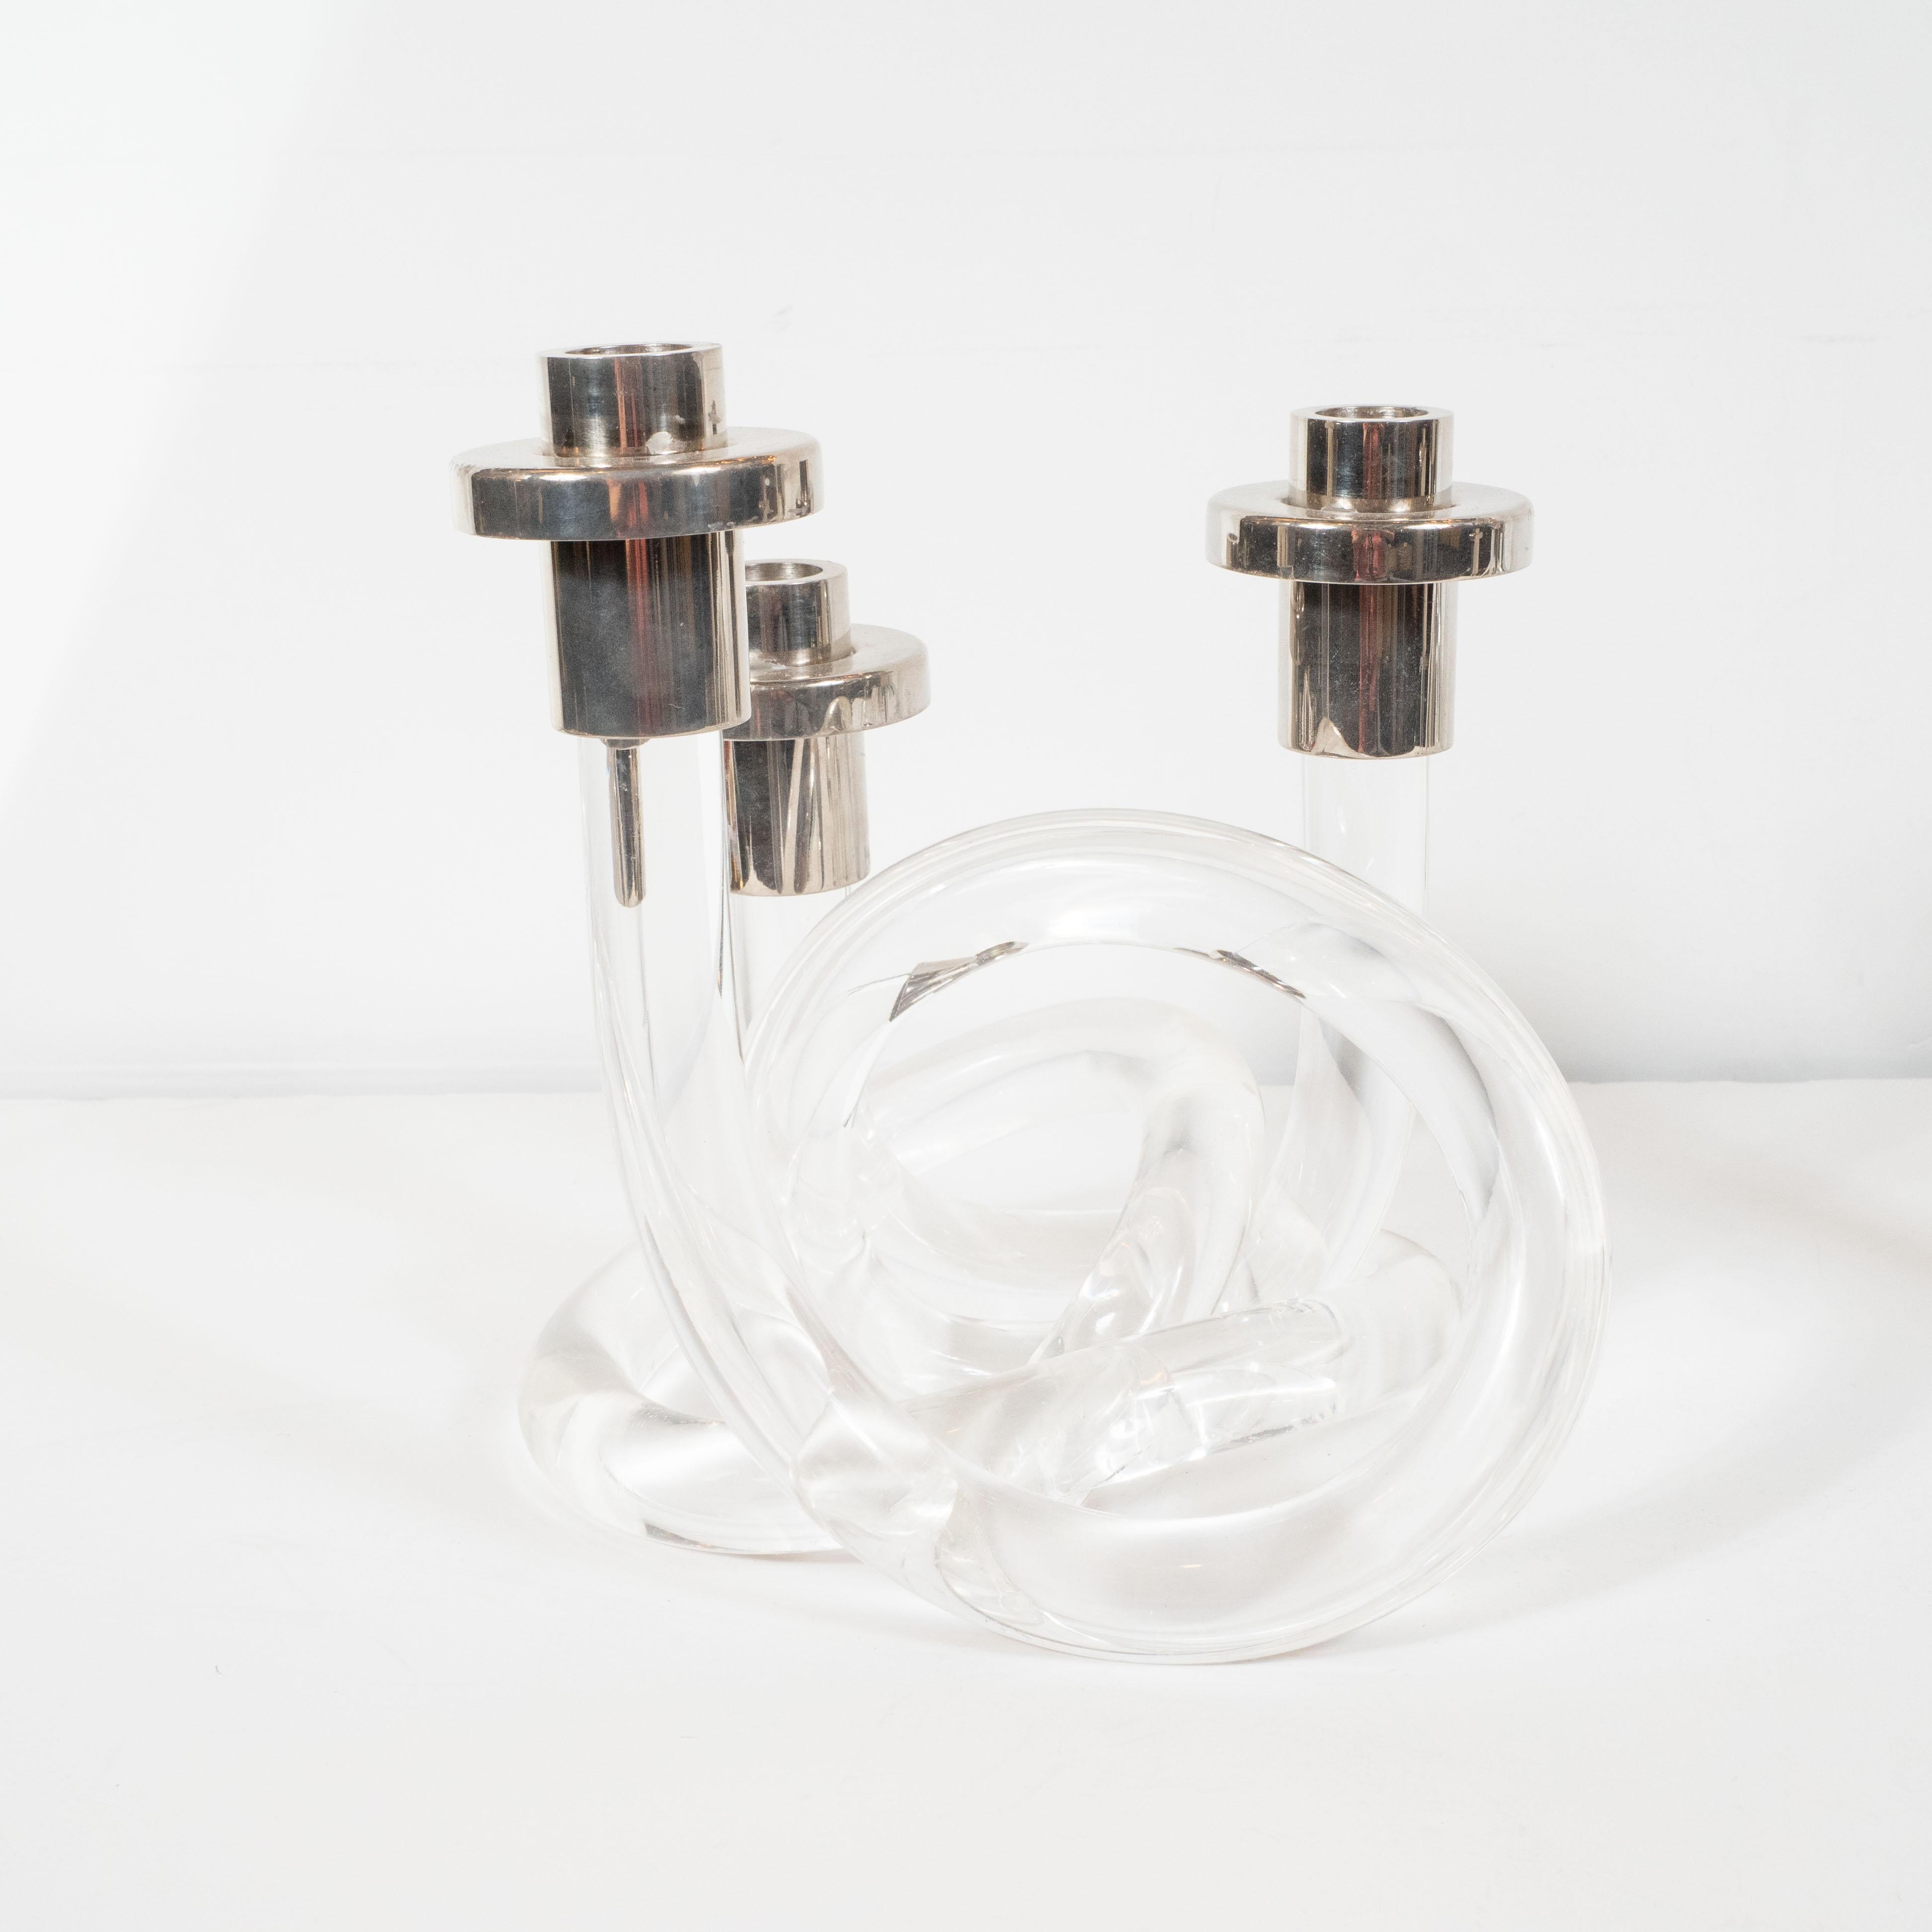 Pair of Midcentury Lucite and Nickel Candlesticks by Dorothy Thorpe 4